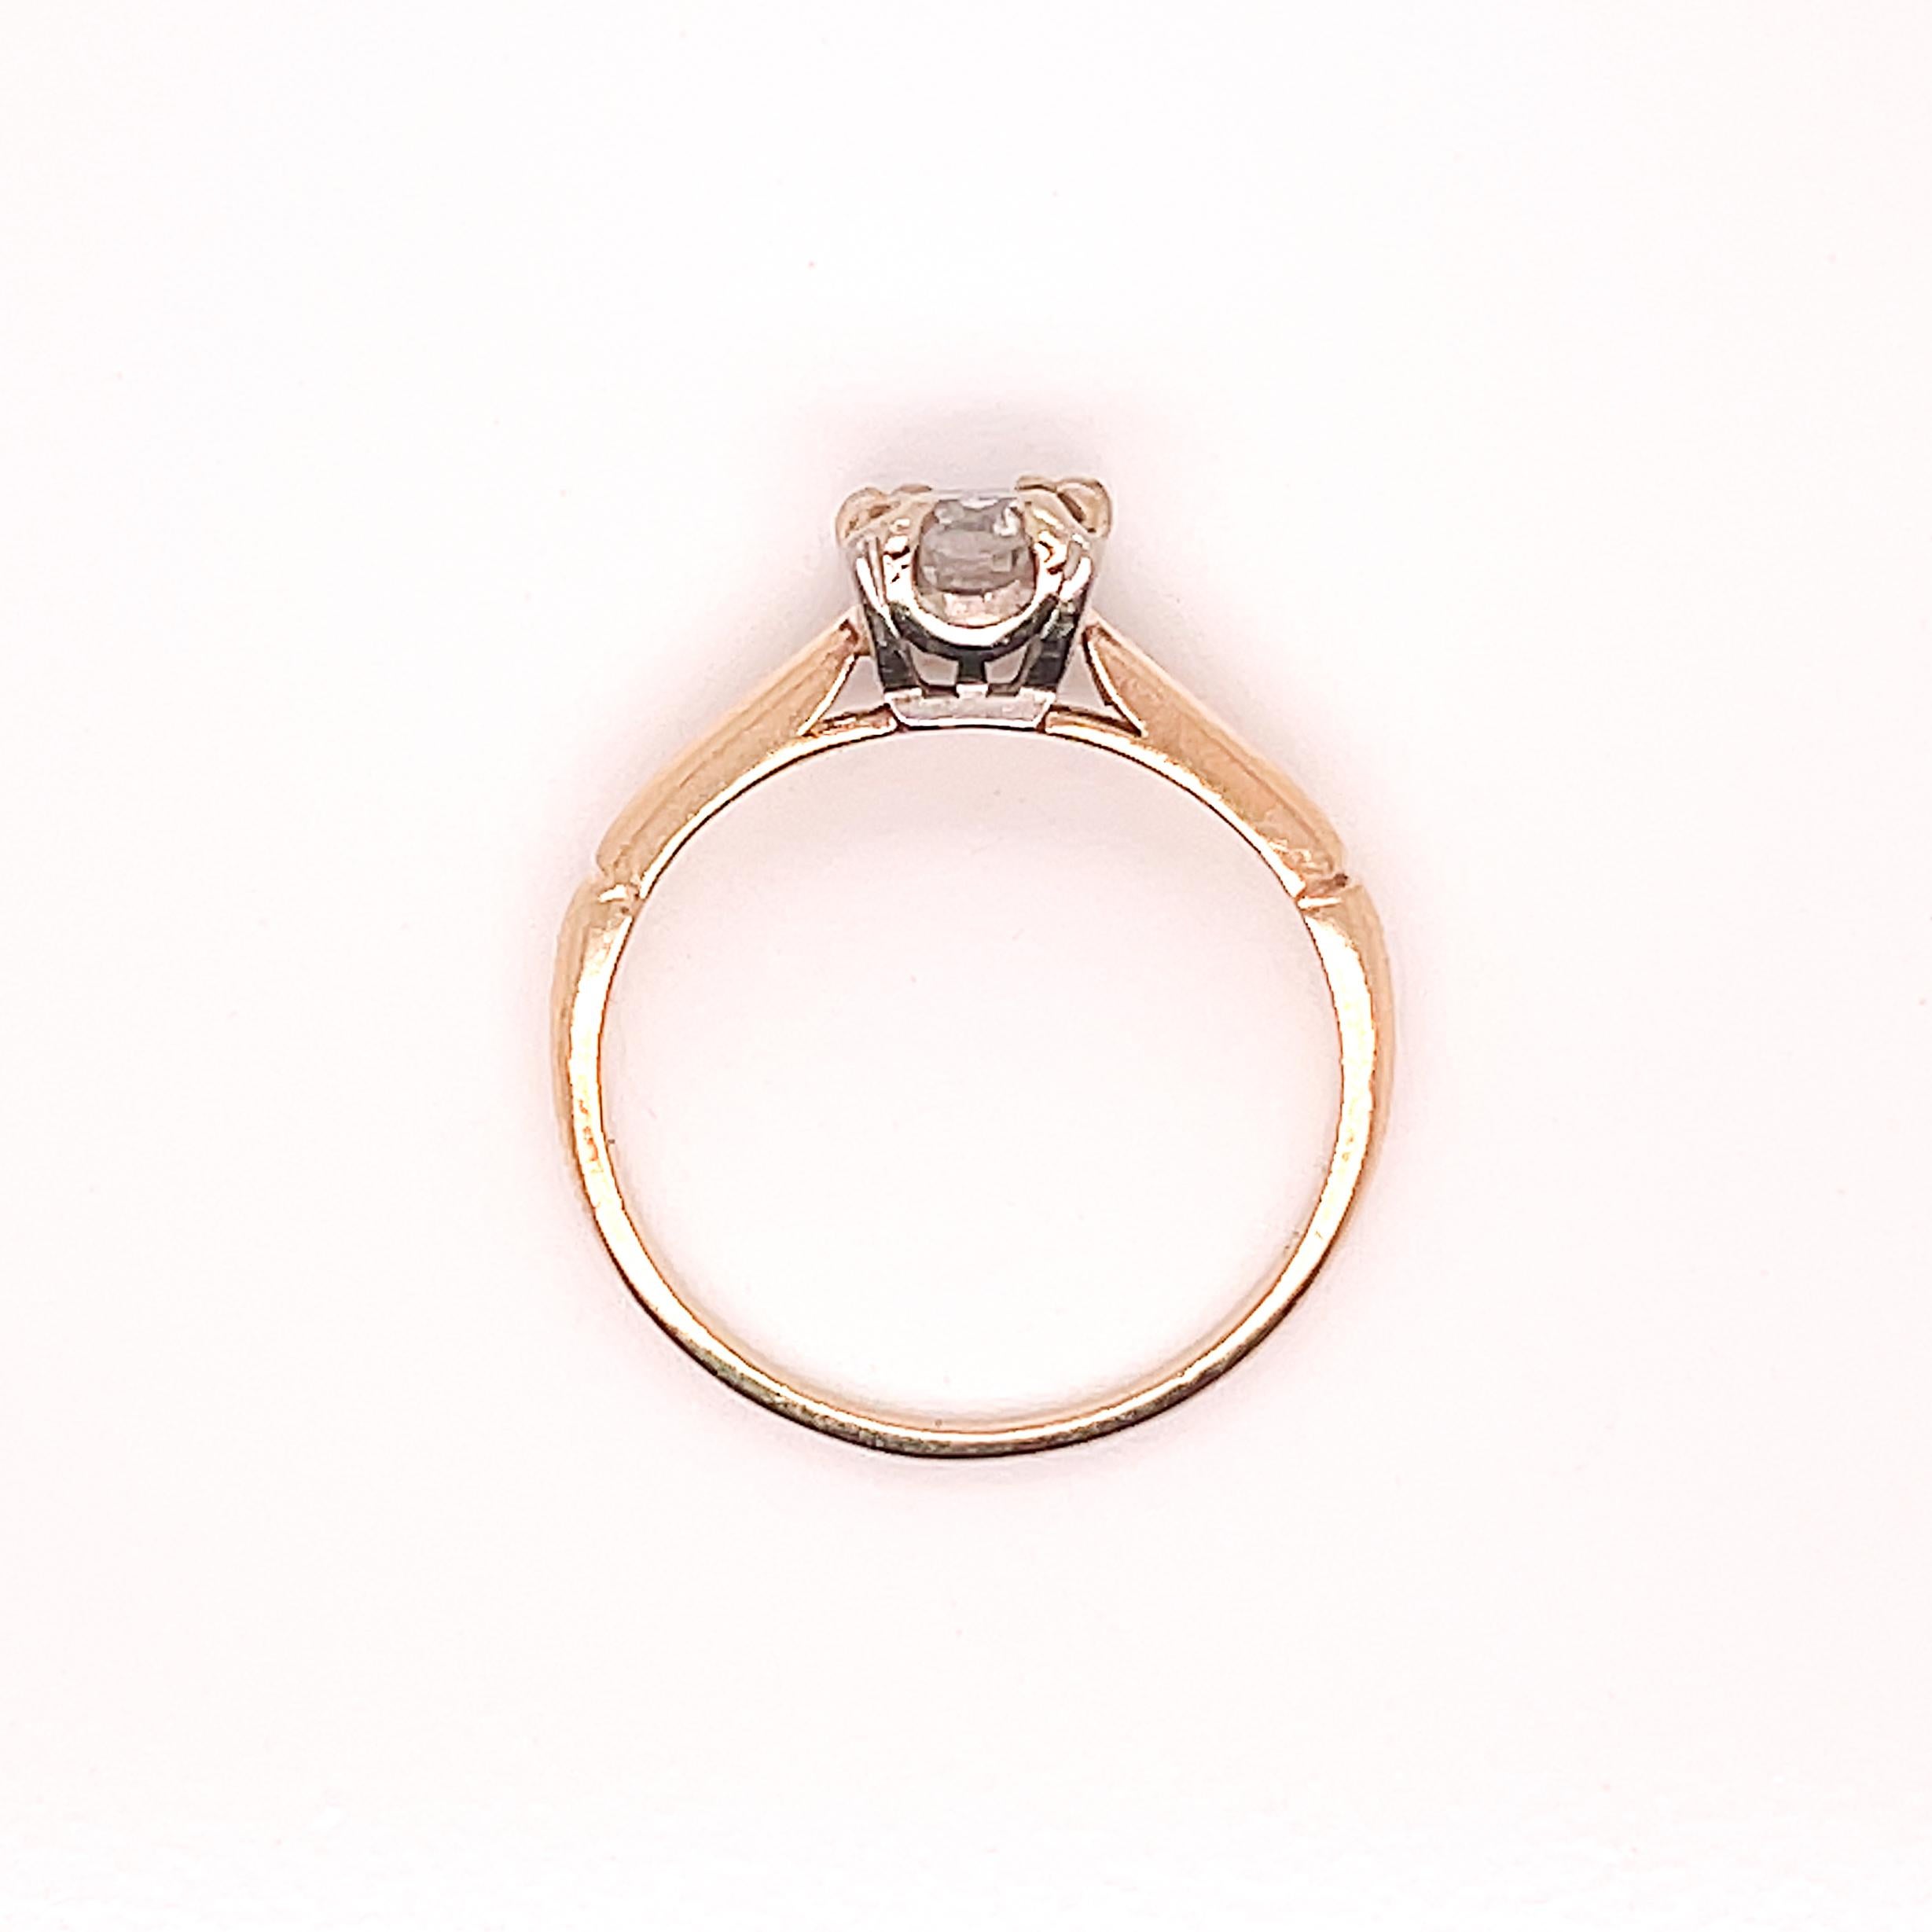 Antique 14 Karat Gold & 0.73 Ct. European Cut Diamond Solitaire Ring In Good Condition For Sale In Philadelphia, PA